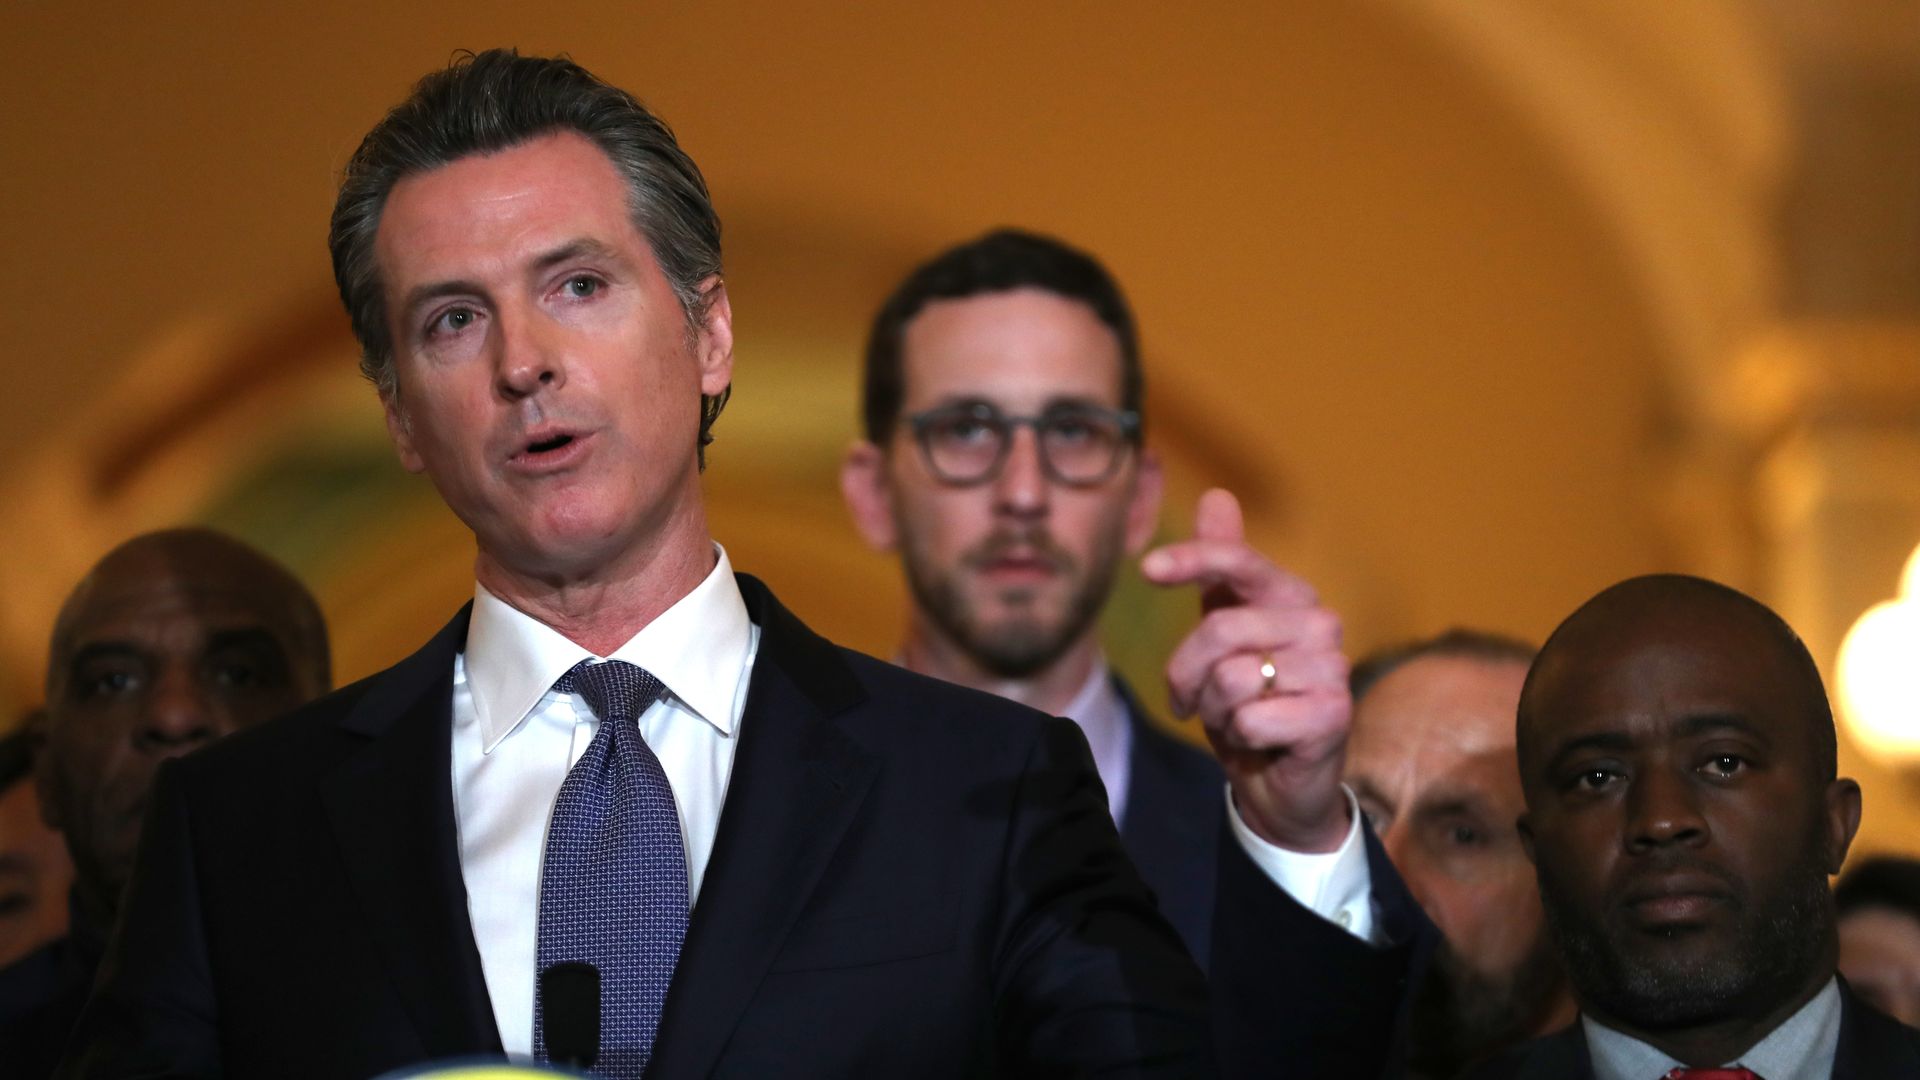 In this image, Gavin Newsom talks and points in a suit with a crowd behind him.